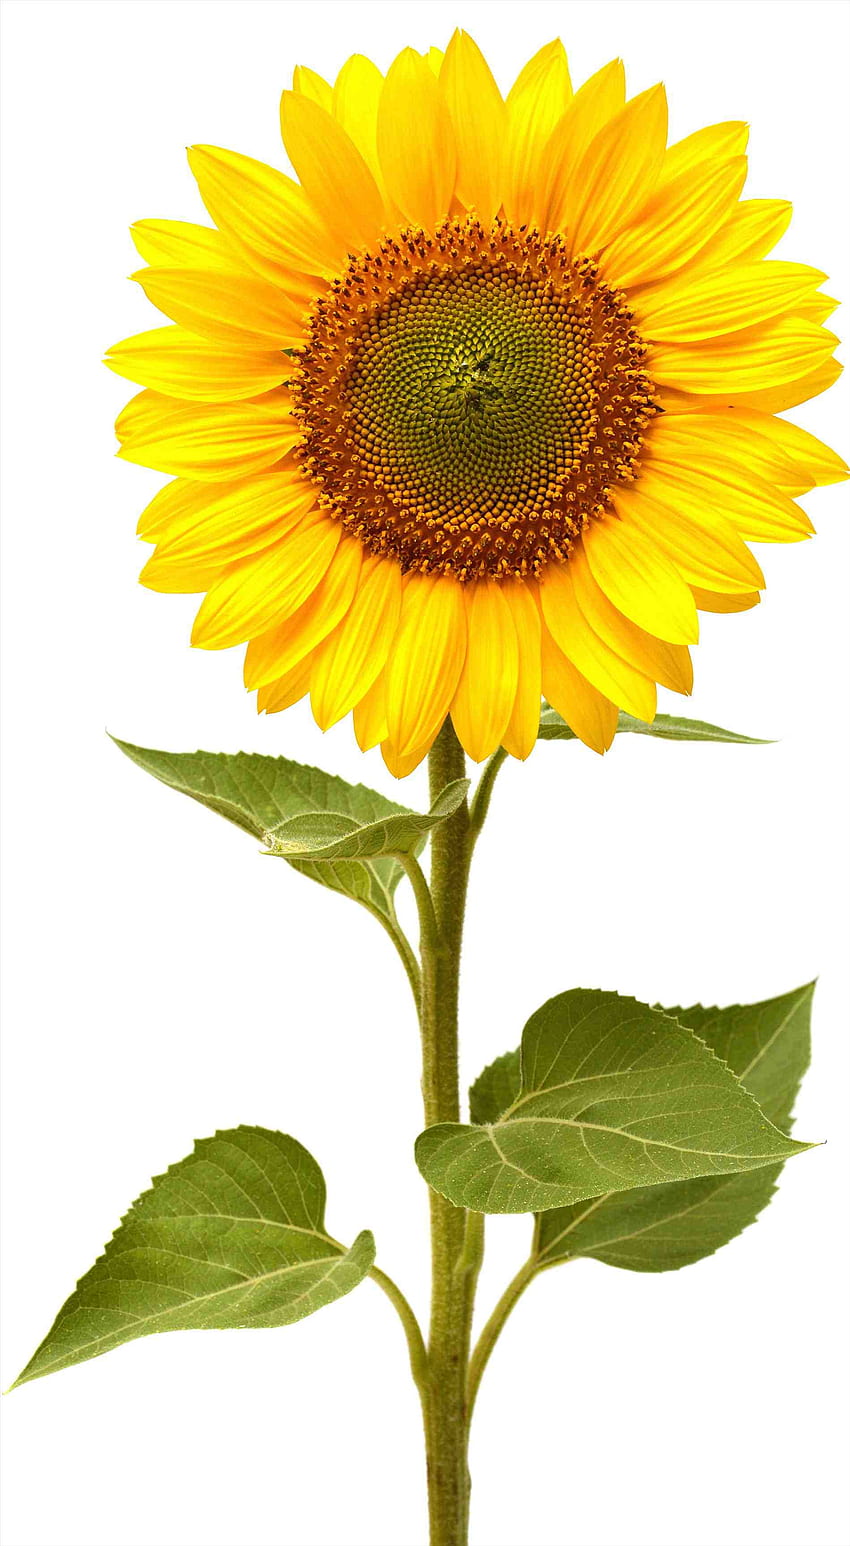 7200 Sunflower Outline Stock Photos Pictures  RoyaltyFree Images   iStock